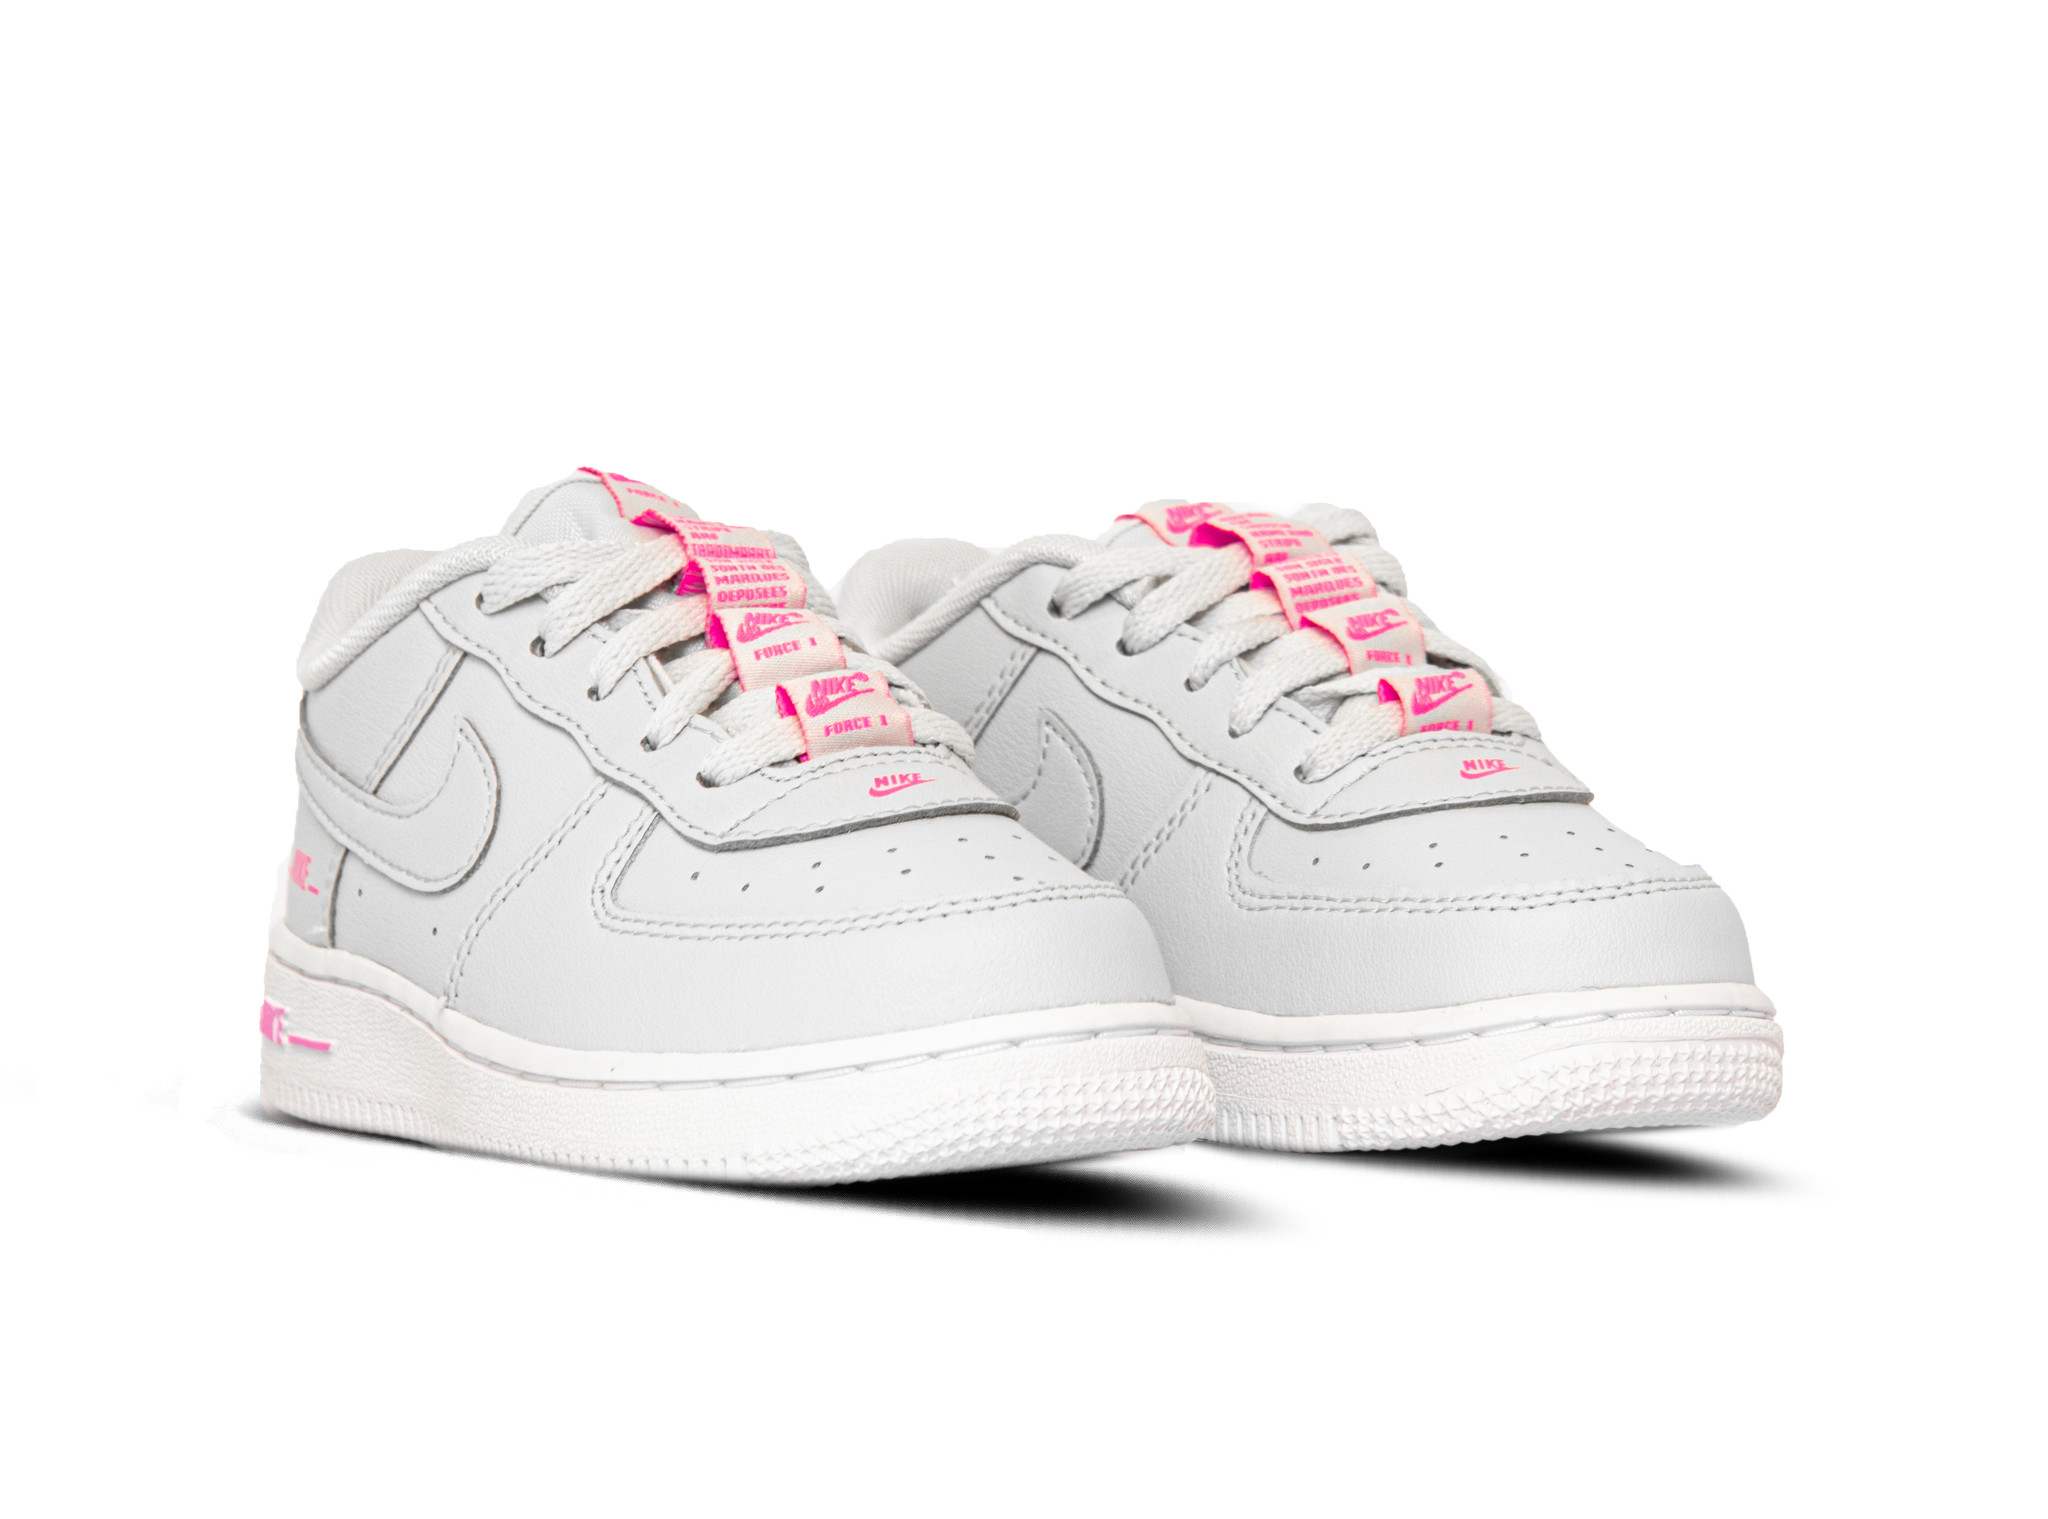 nike air force 1 lv8 3 photon dust pink